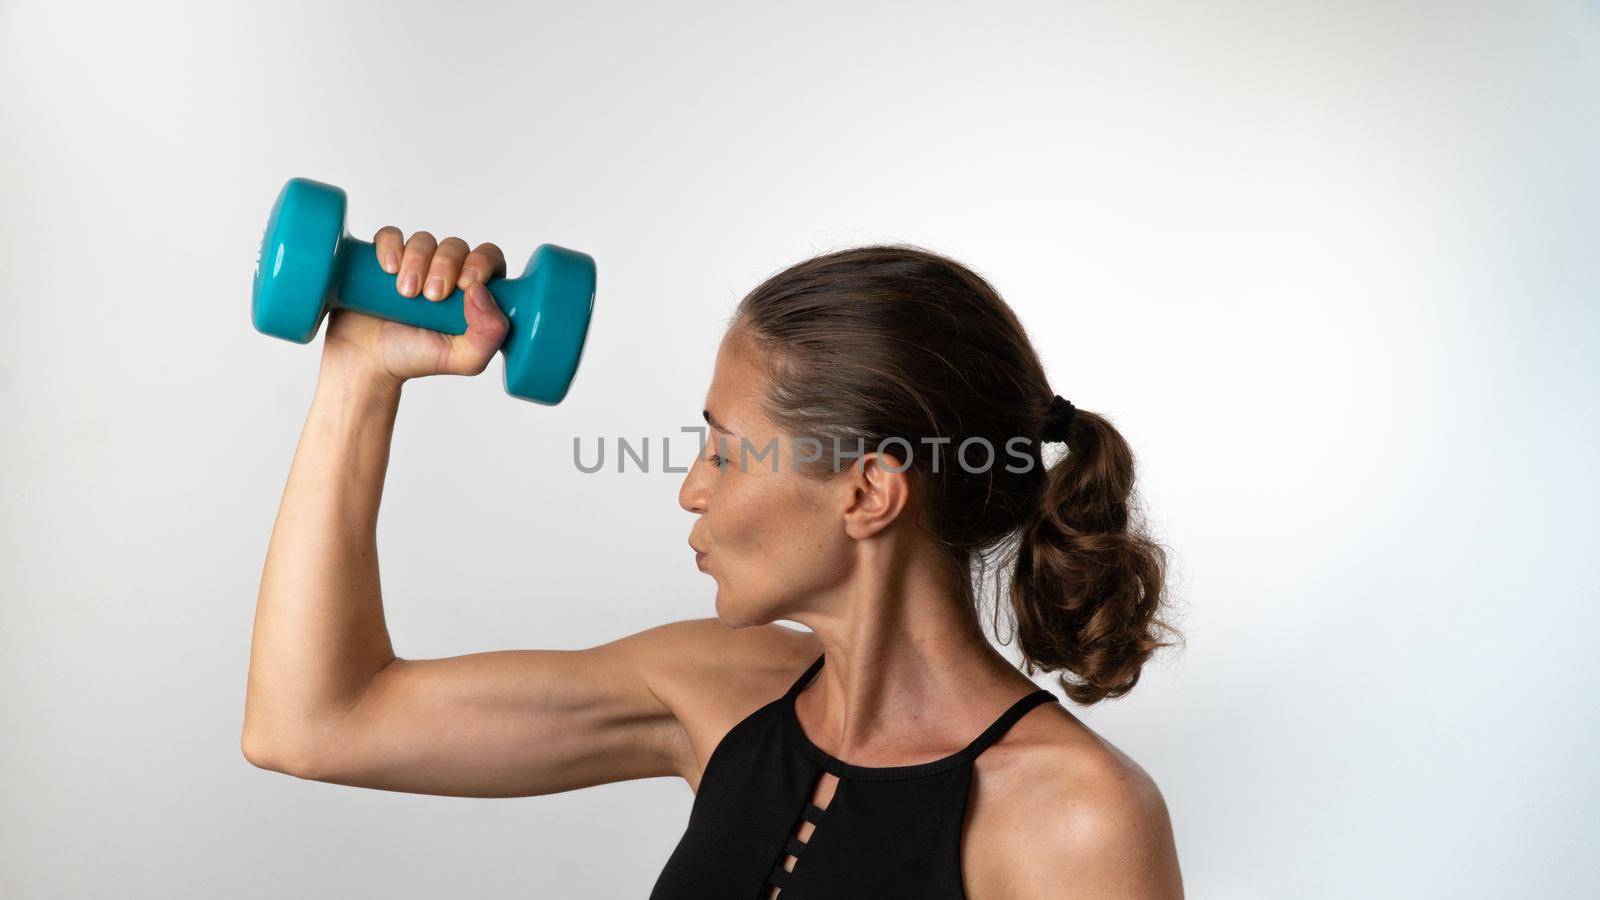 A woman kisses her biceps after a sports workout with a dumbbell in her hands. High quality photo